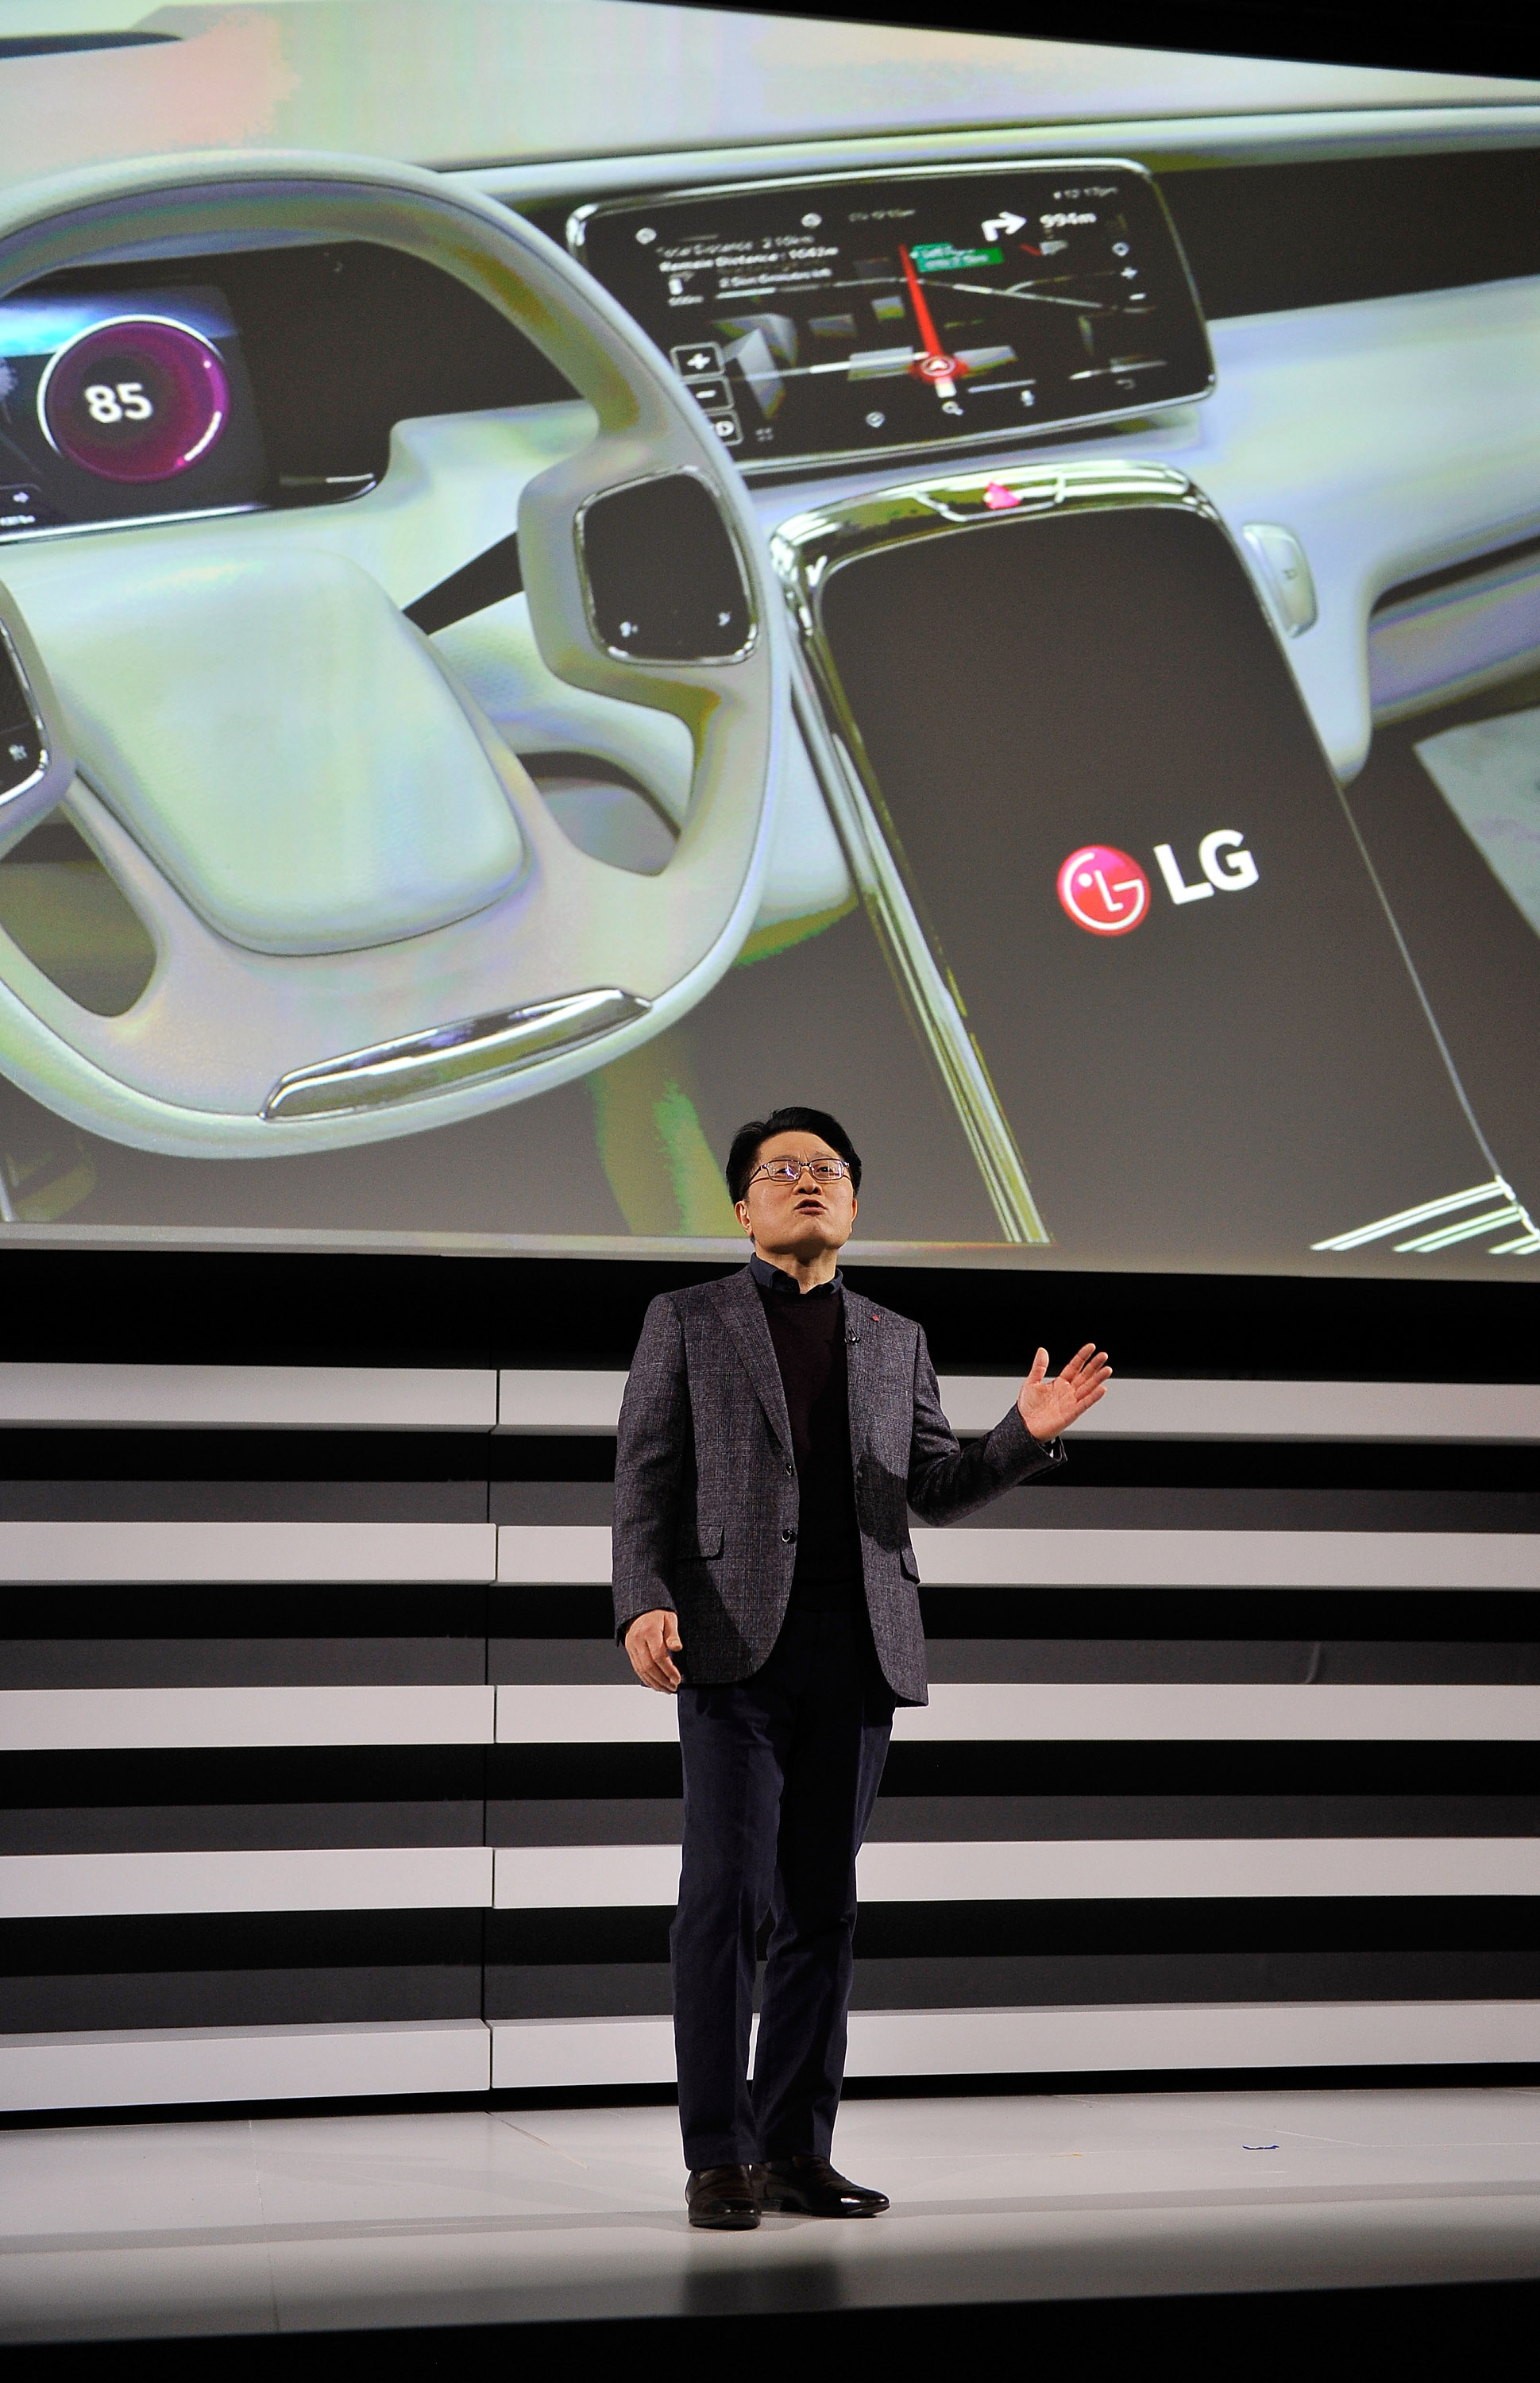 LG Electronics President and Chief Technology Officer Skott Ahn speaks at the 2015 International Consumer Electronics Show in Las Vegas on Jan. 5, 2015.